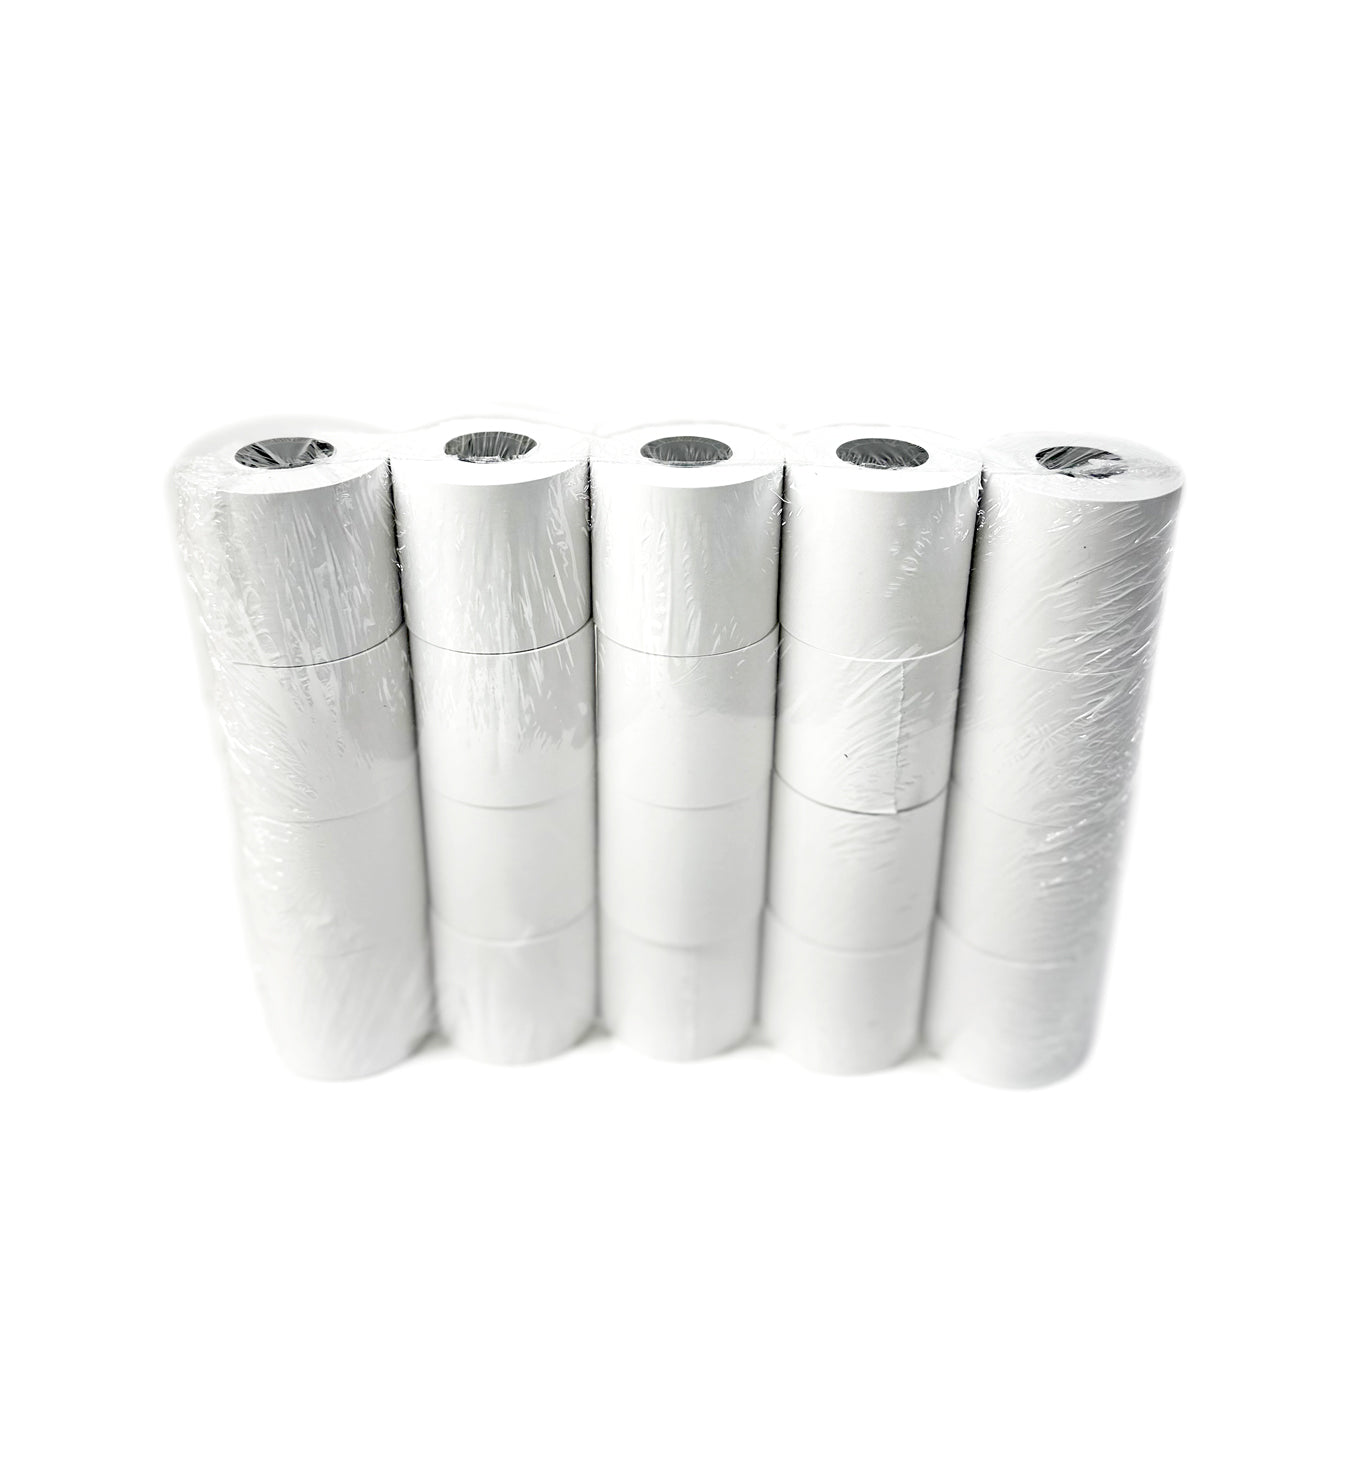 1 15/16" x 2 1/8" NCR 19D Single Ply Paper, 20 Rolls/Pack